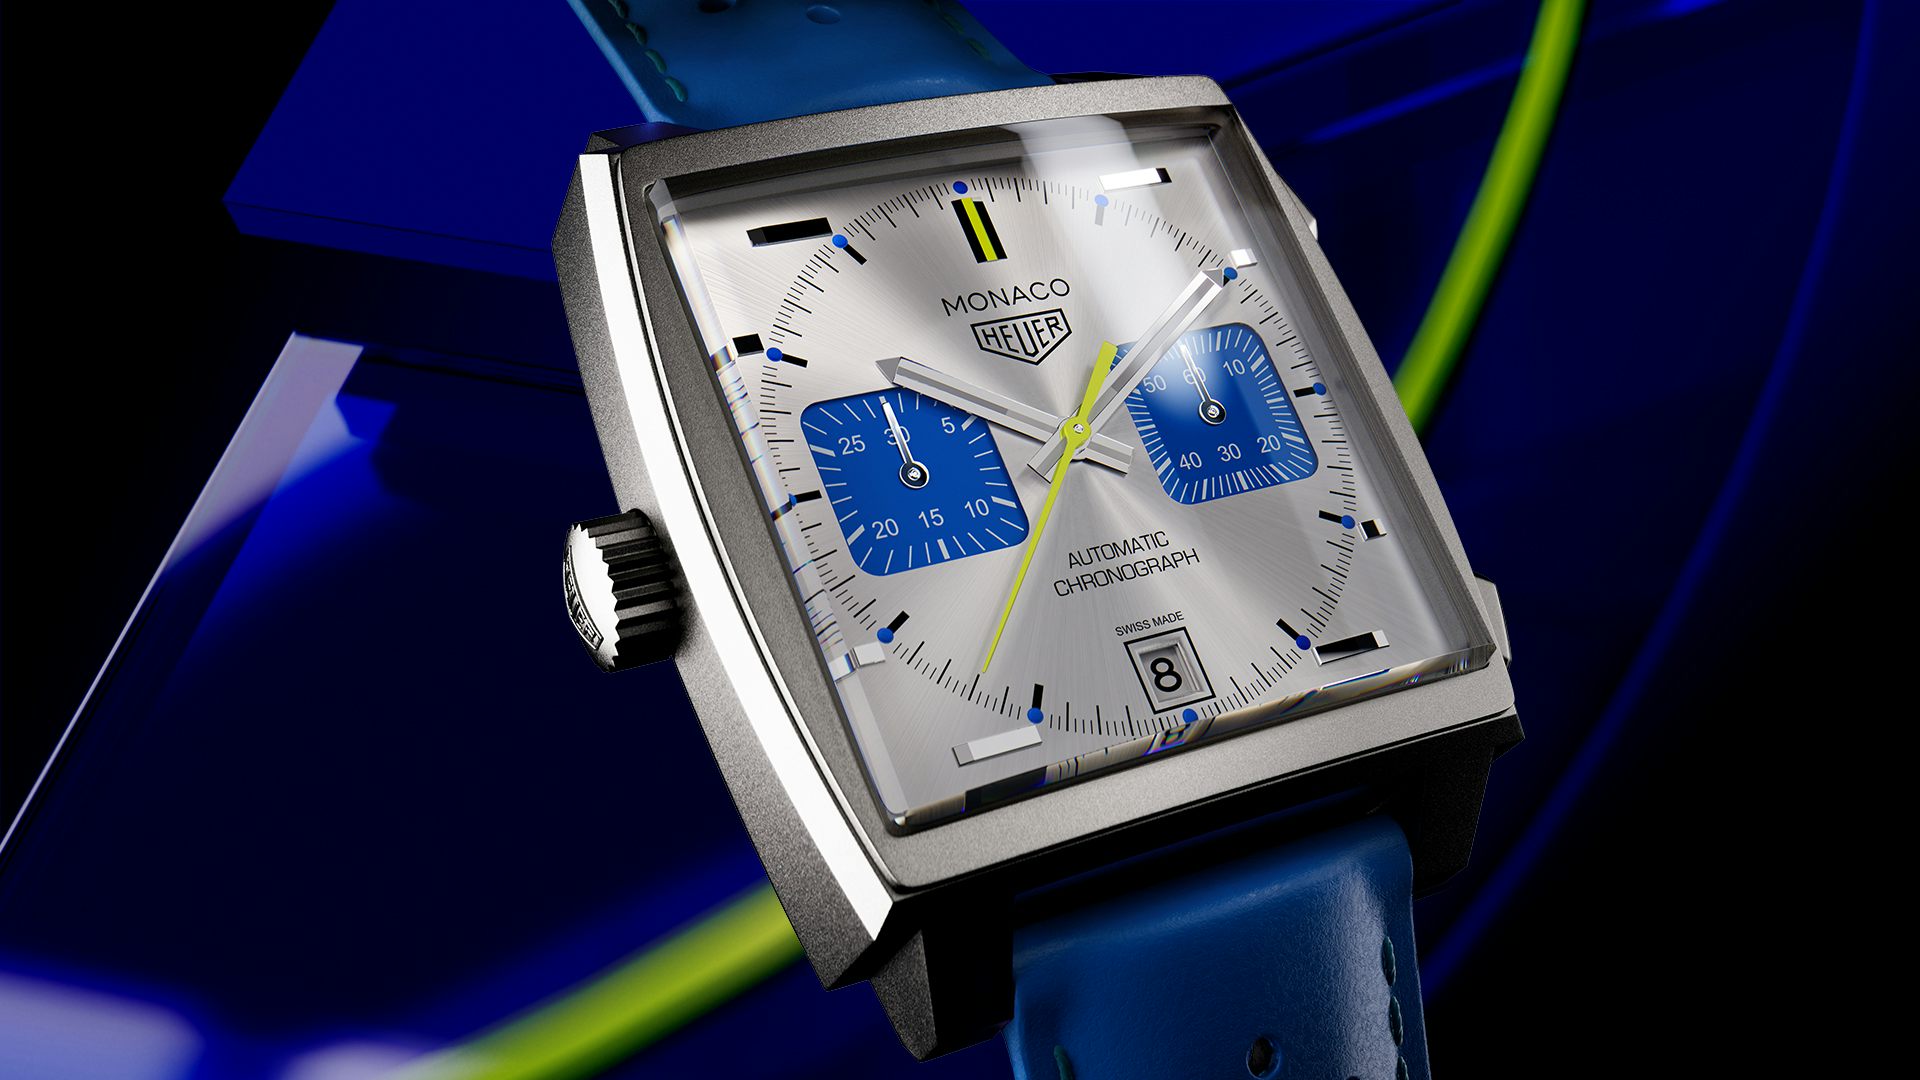 TAG Heuer Monaco Automatic Watch Collection has a sporty design